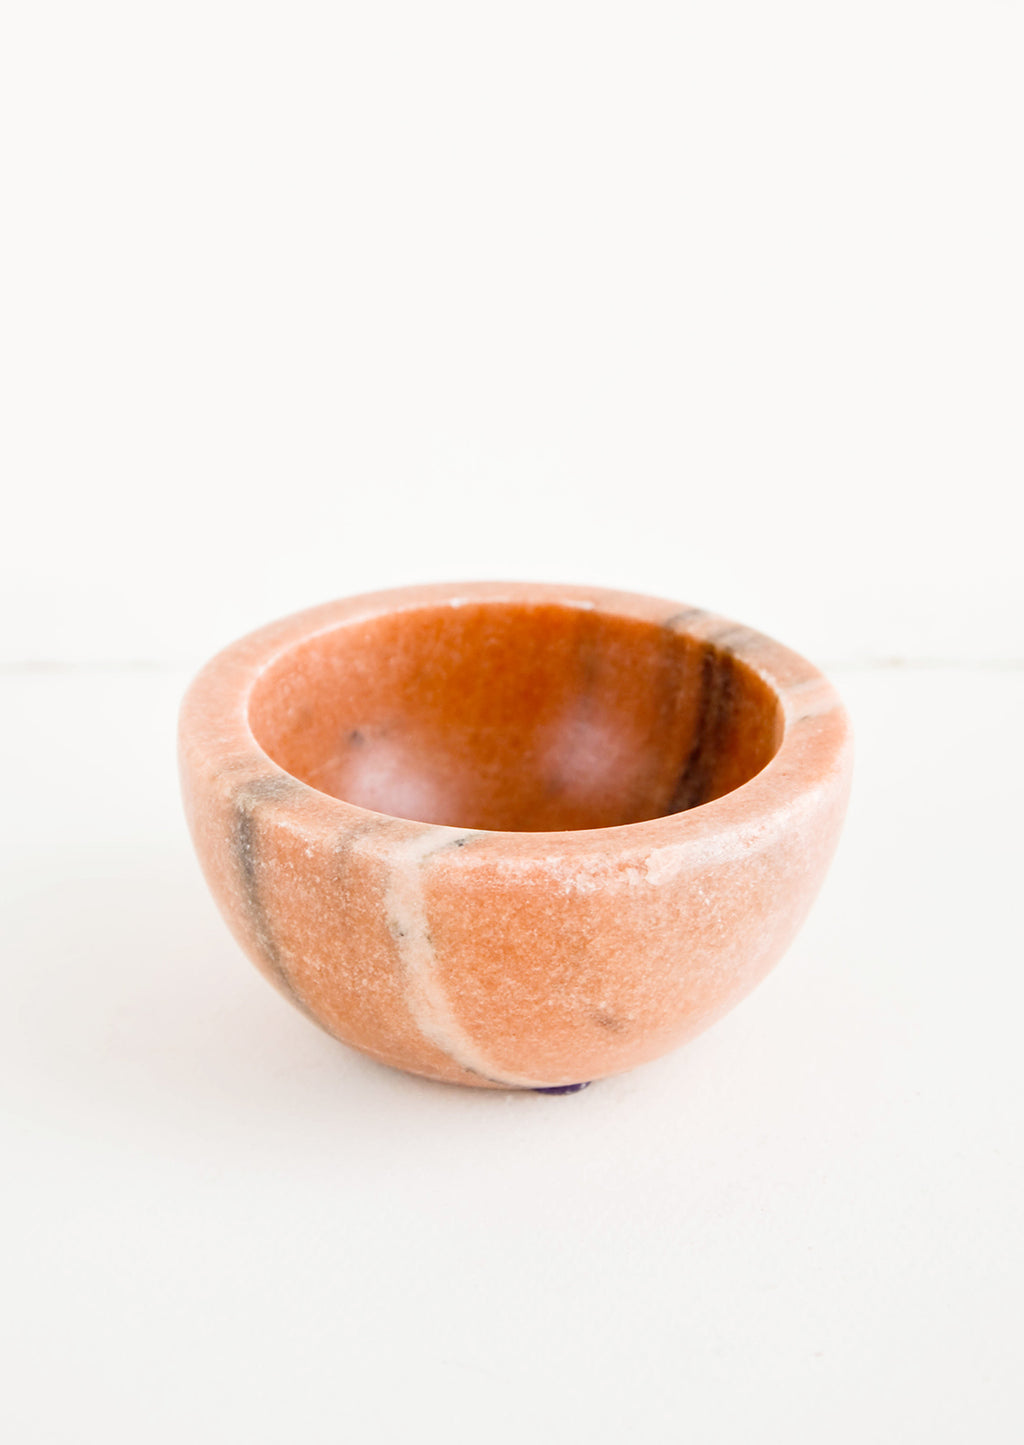 Peach: Small marble bowl made from solid peach colored marble